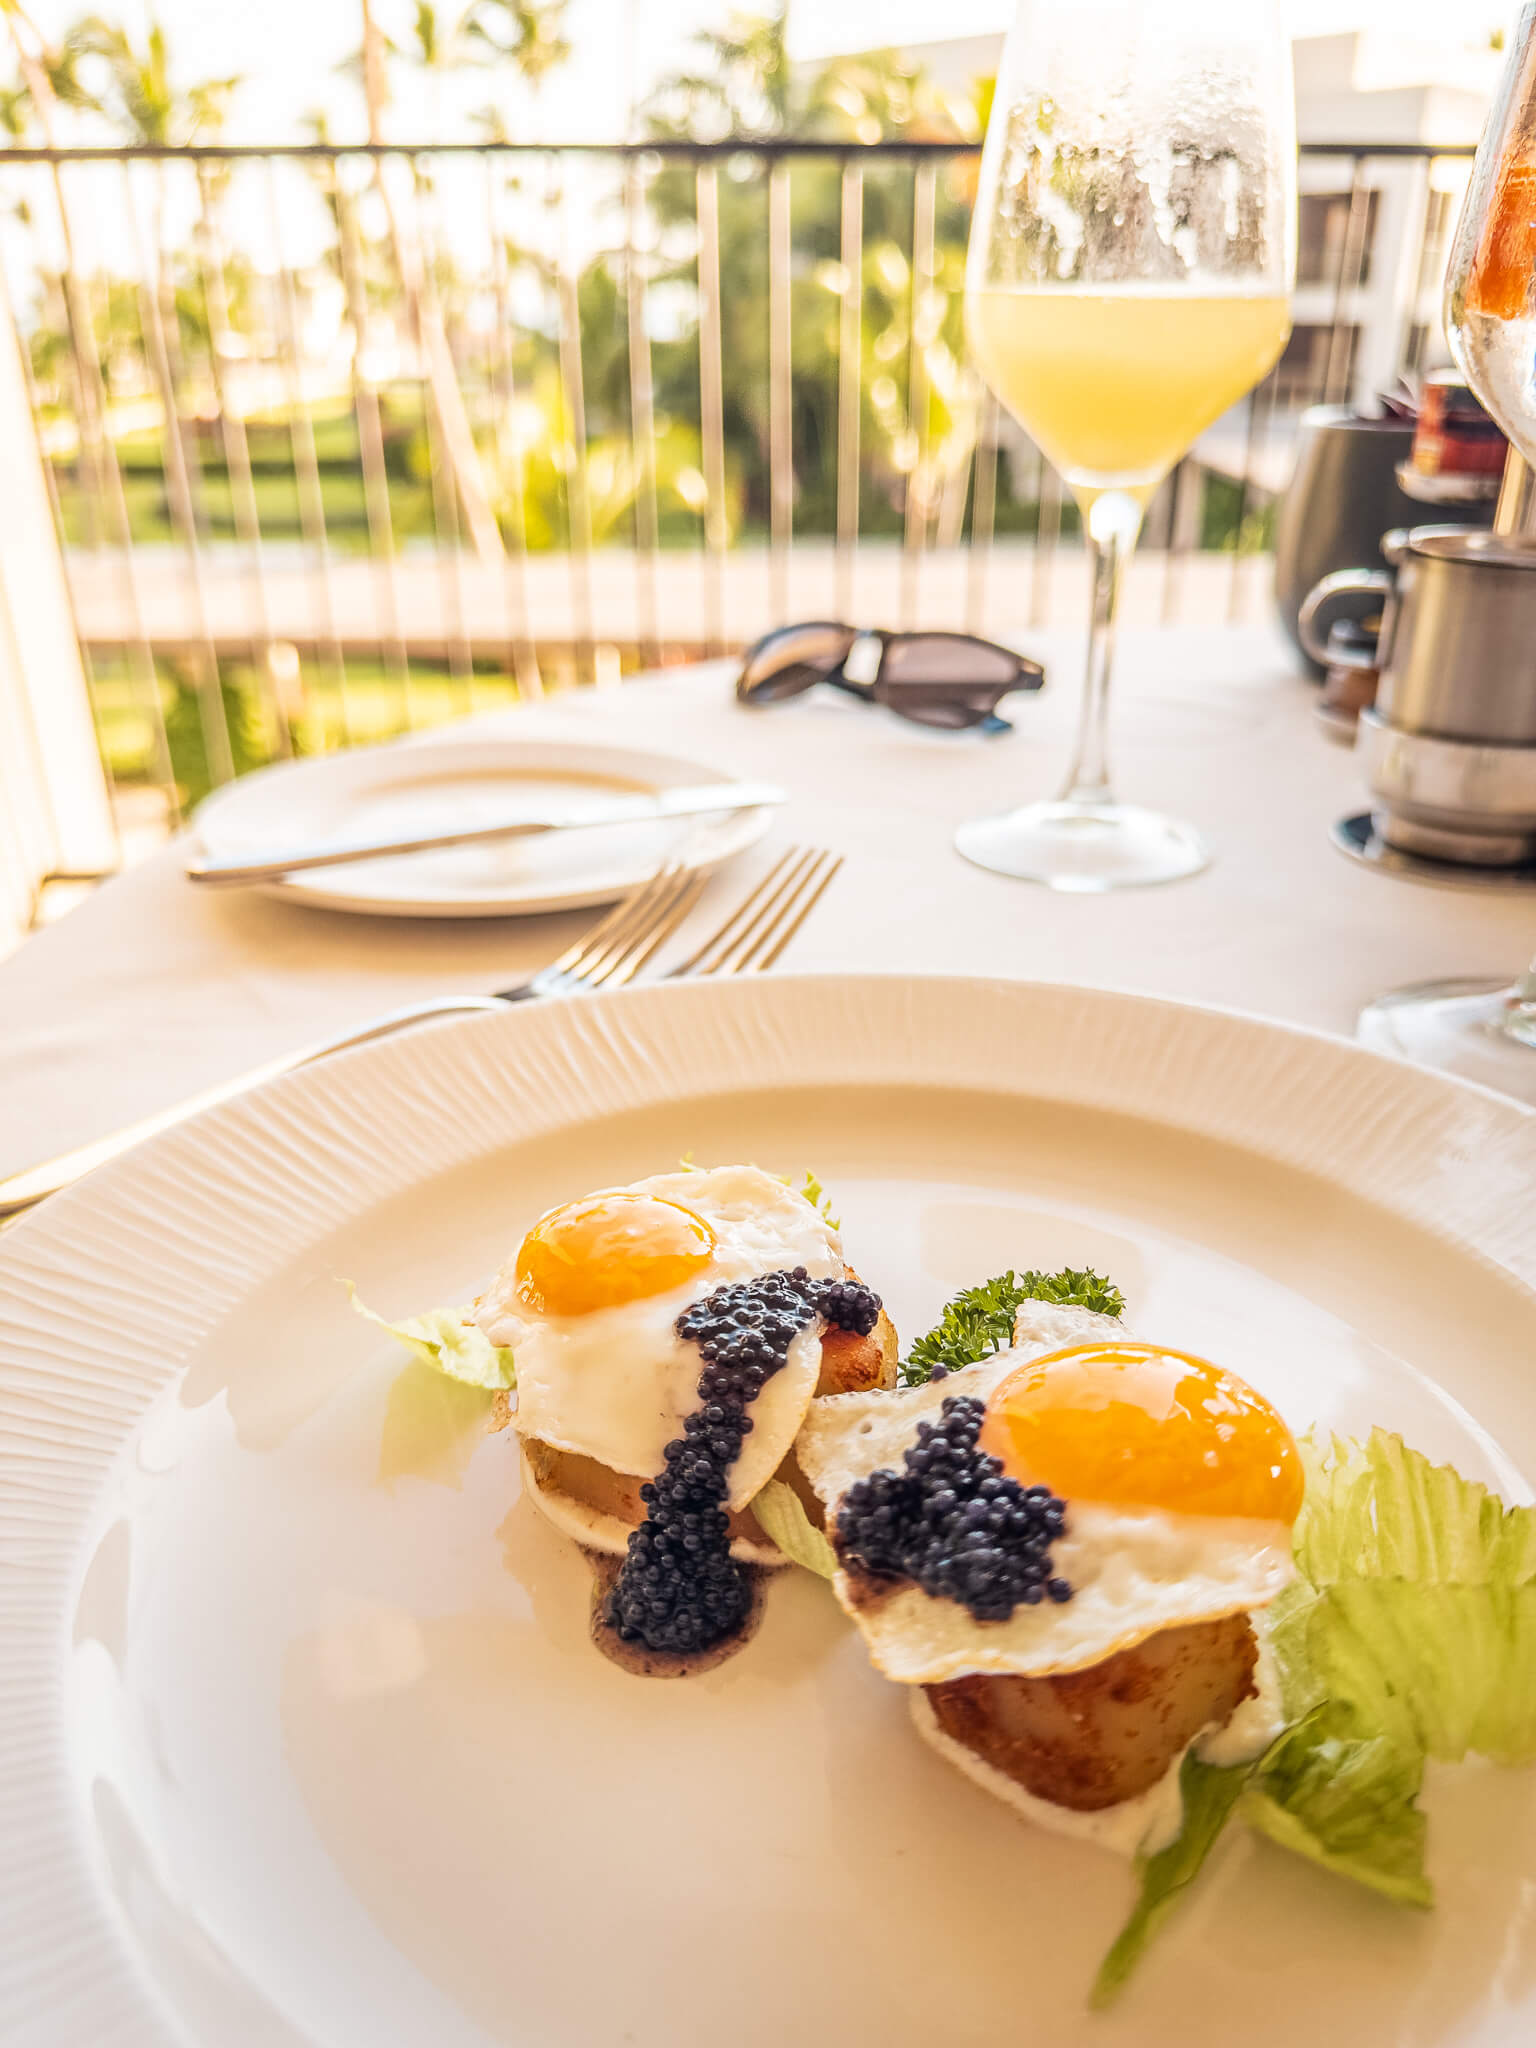 Caviar, eggs and mimosa for breakfast at Excellence El Carmen's Magna restaurant